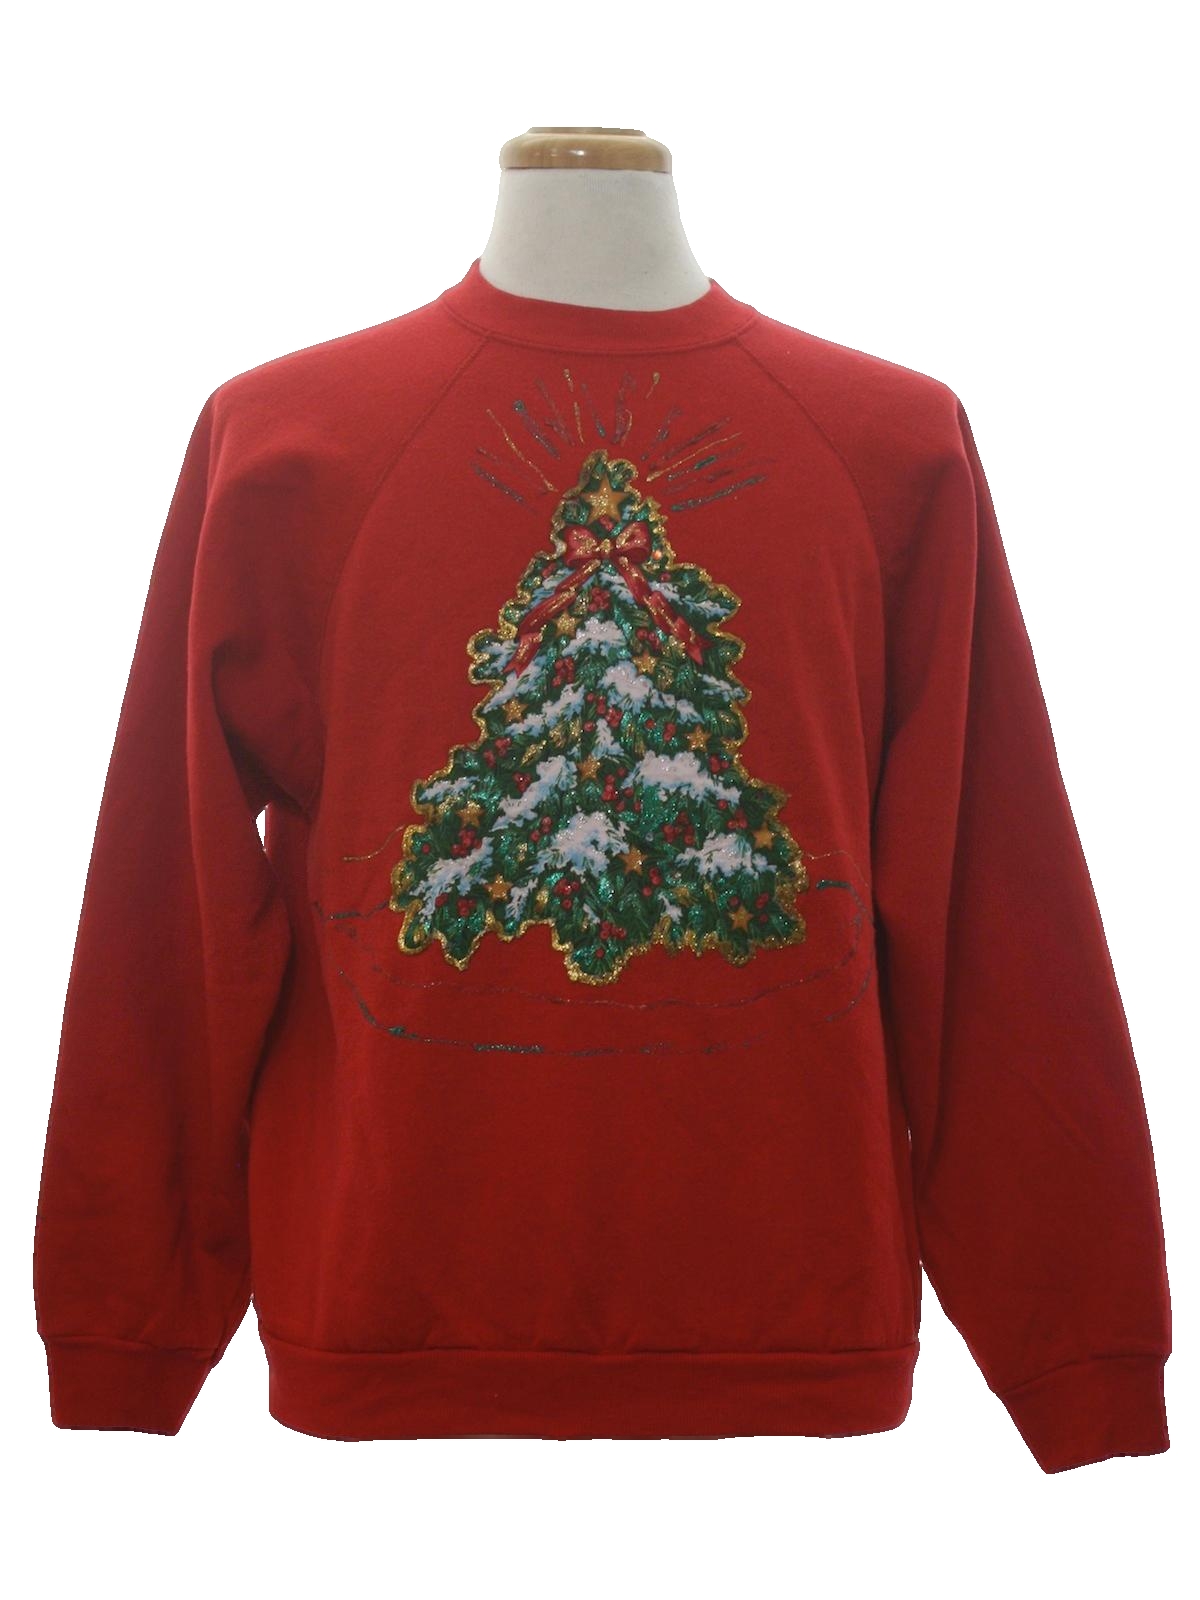 Puffy Glitter Painted Ugly Christmas Sweatshirt: -Tultex- Unisex red ...